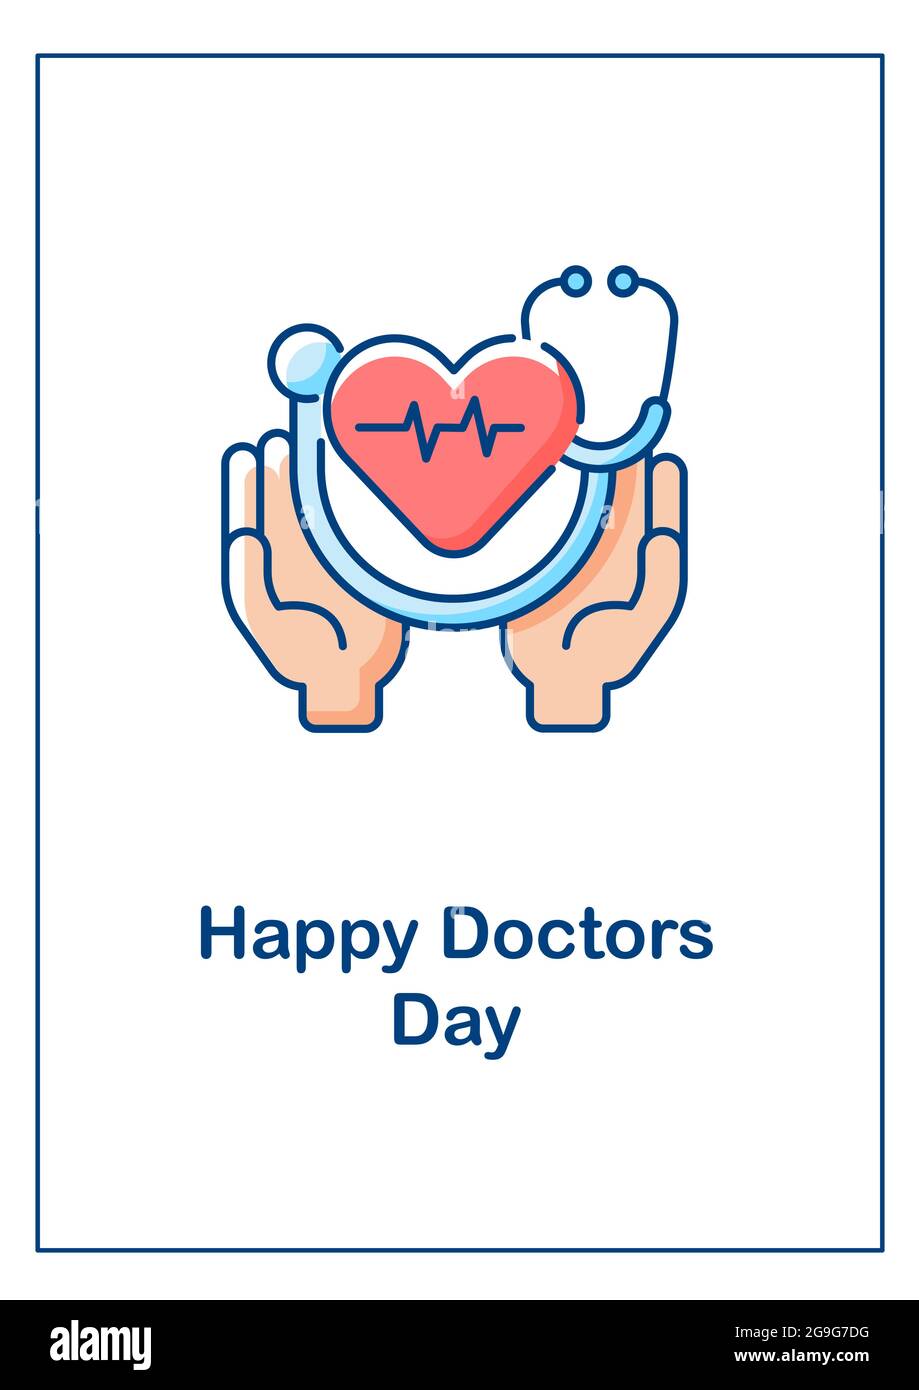 Happy doctors day greeting card with color icon element Stock ...